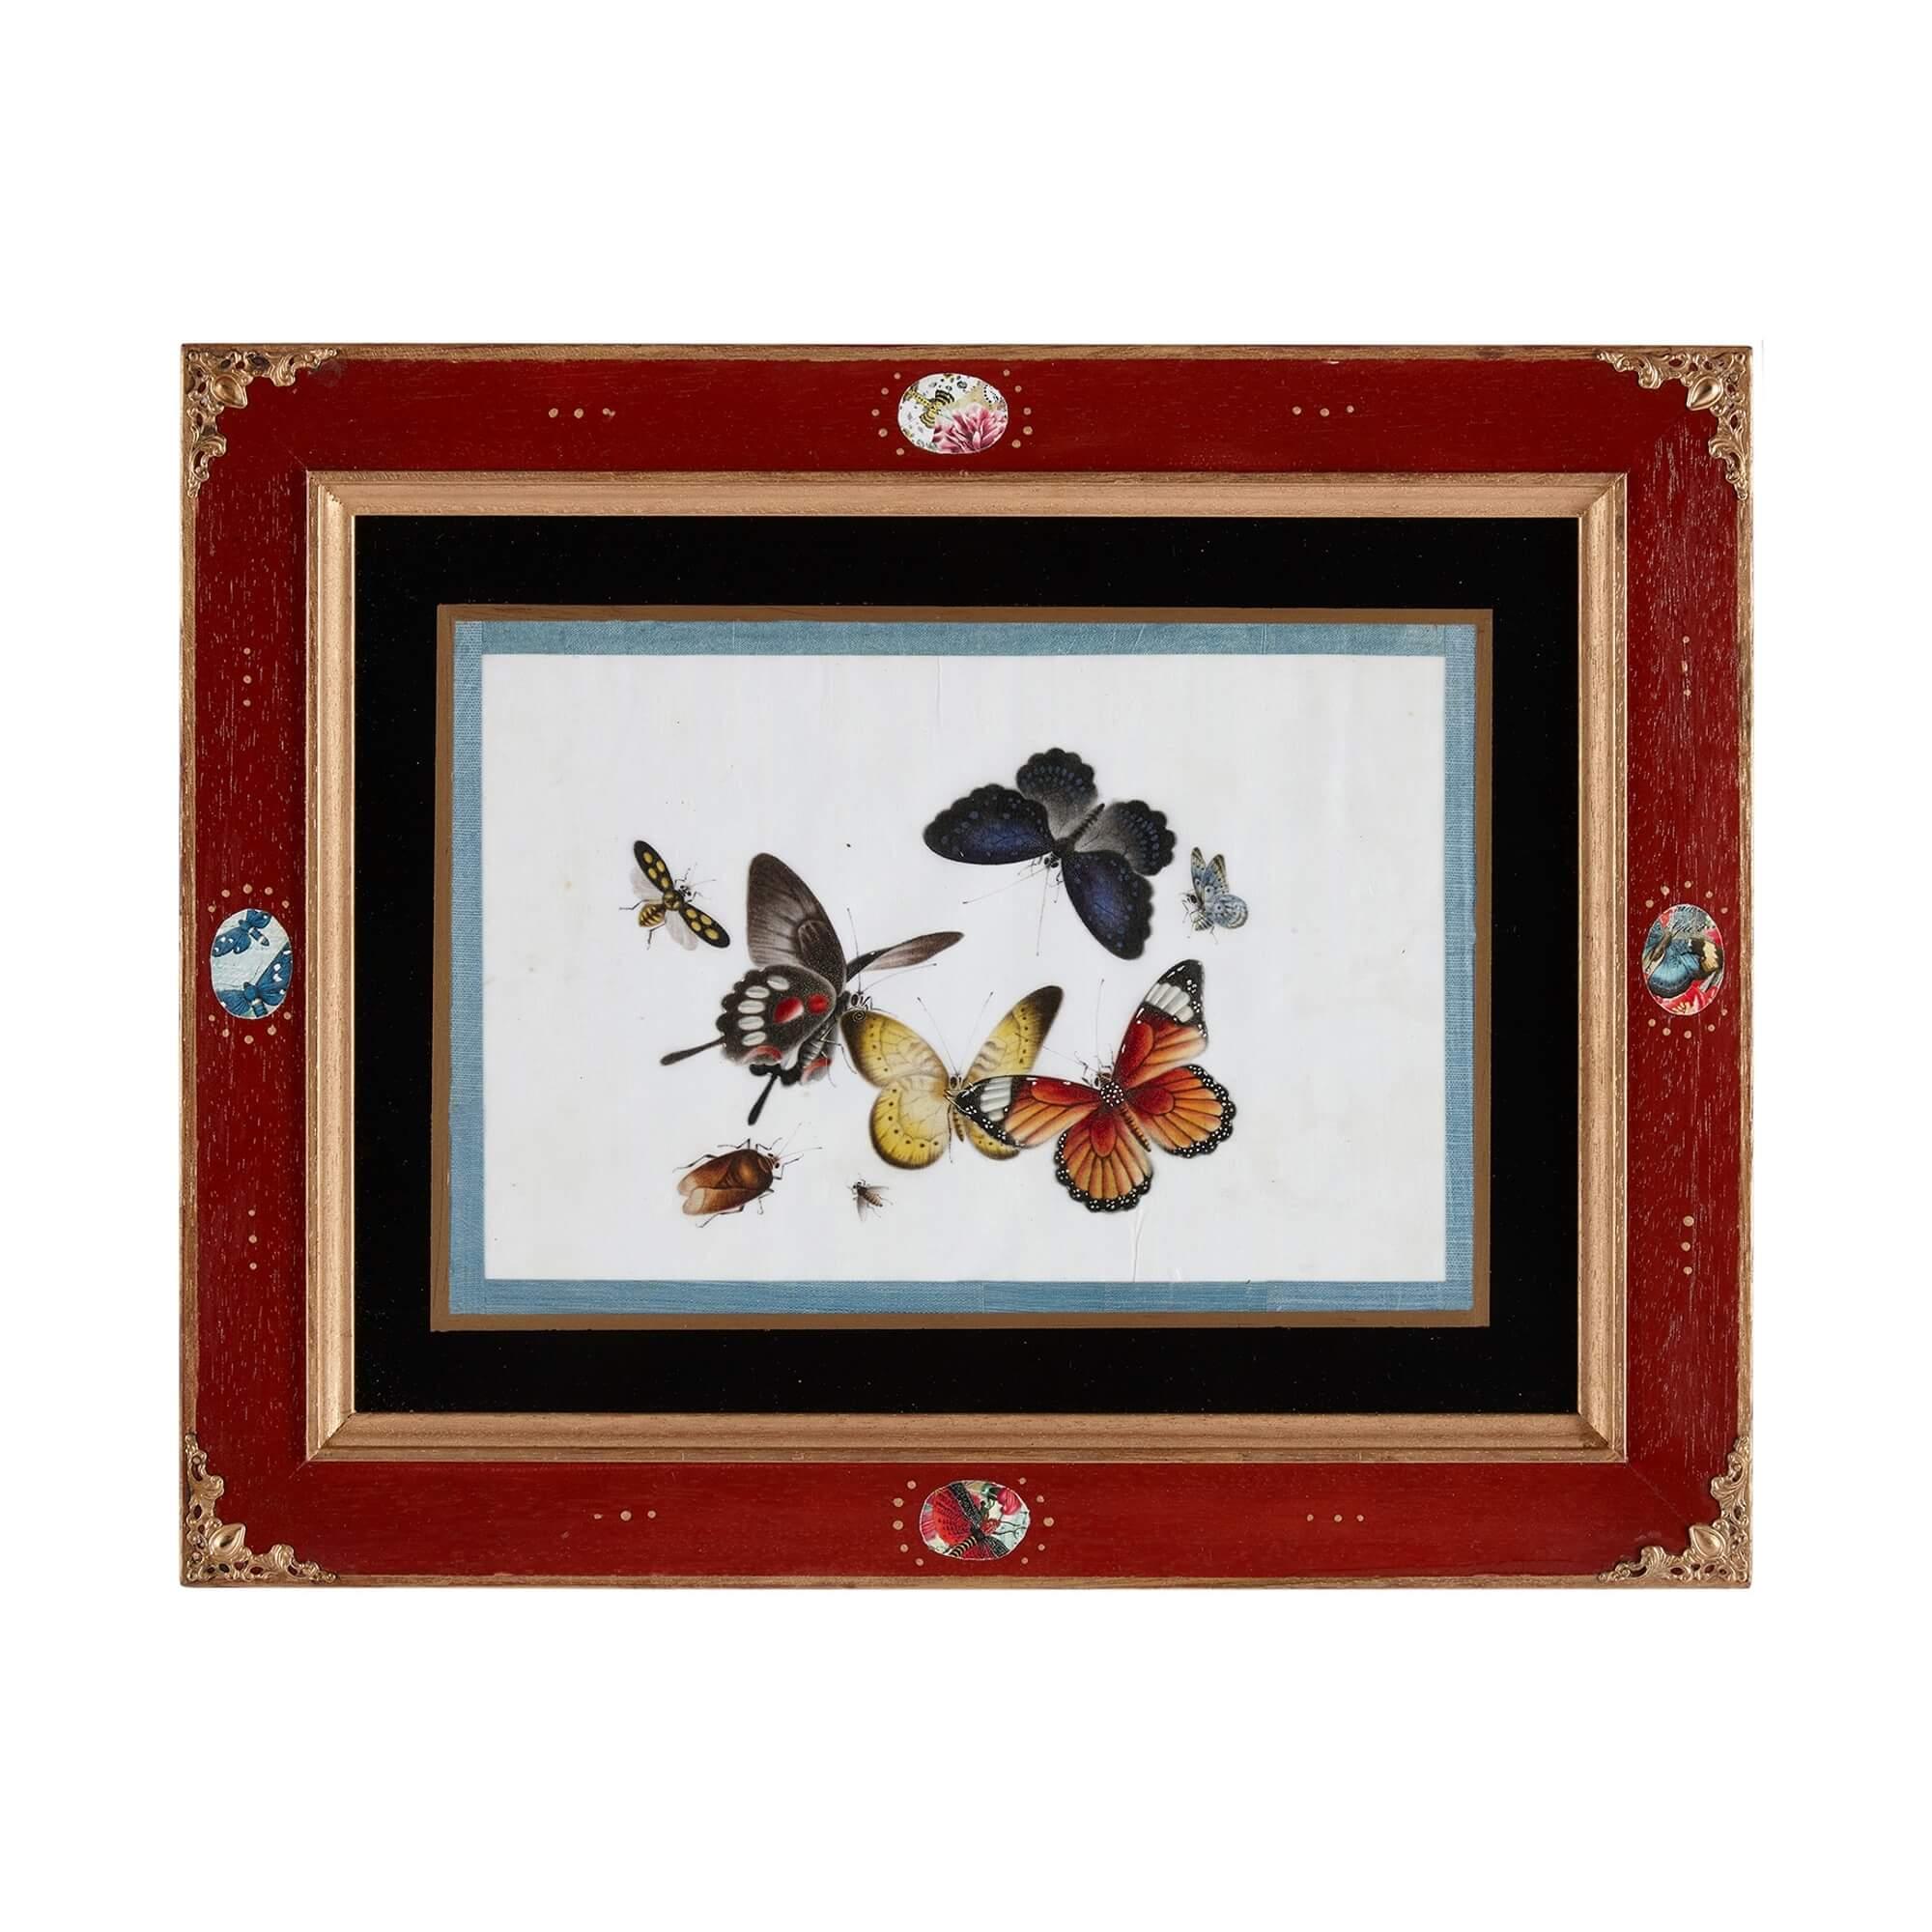 Antique set of twelve Chinese pith paintings depicting butterflies
Chinese, 19th Century
Panel: Height 19cm, width 28cm
Frame: Height 35cm, width 34cm, depth 1.5cm

This superb set of twelve watercolour paintings depicts various insects. Elaborately